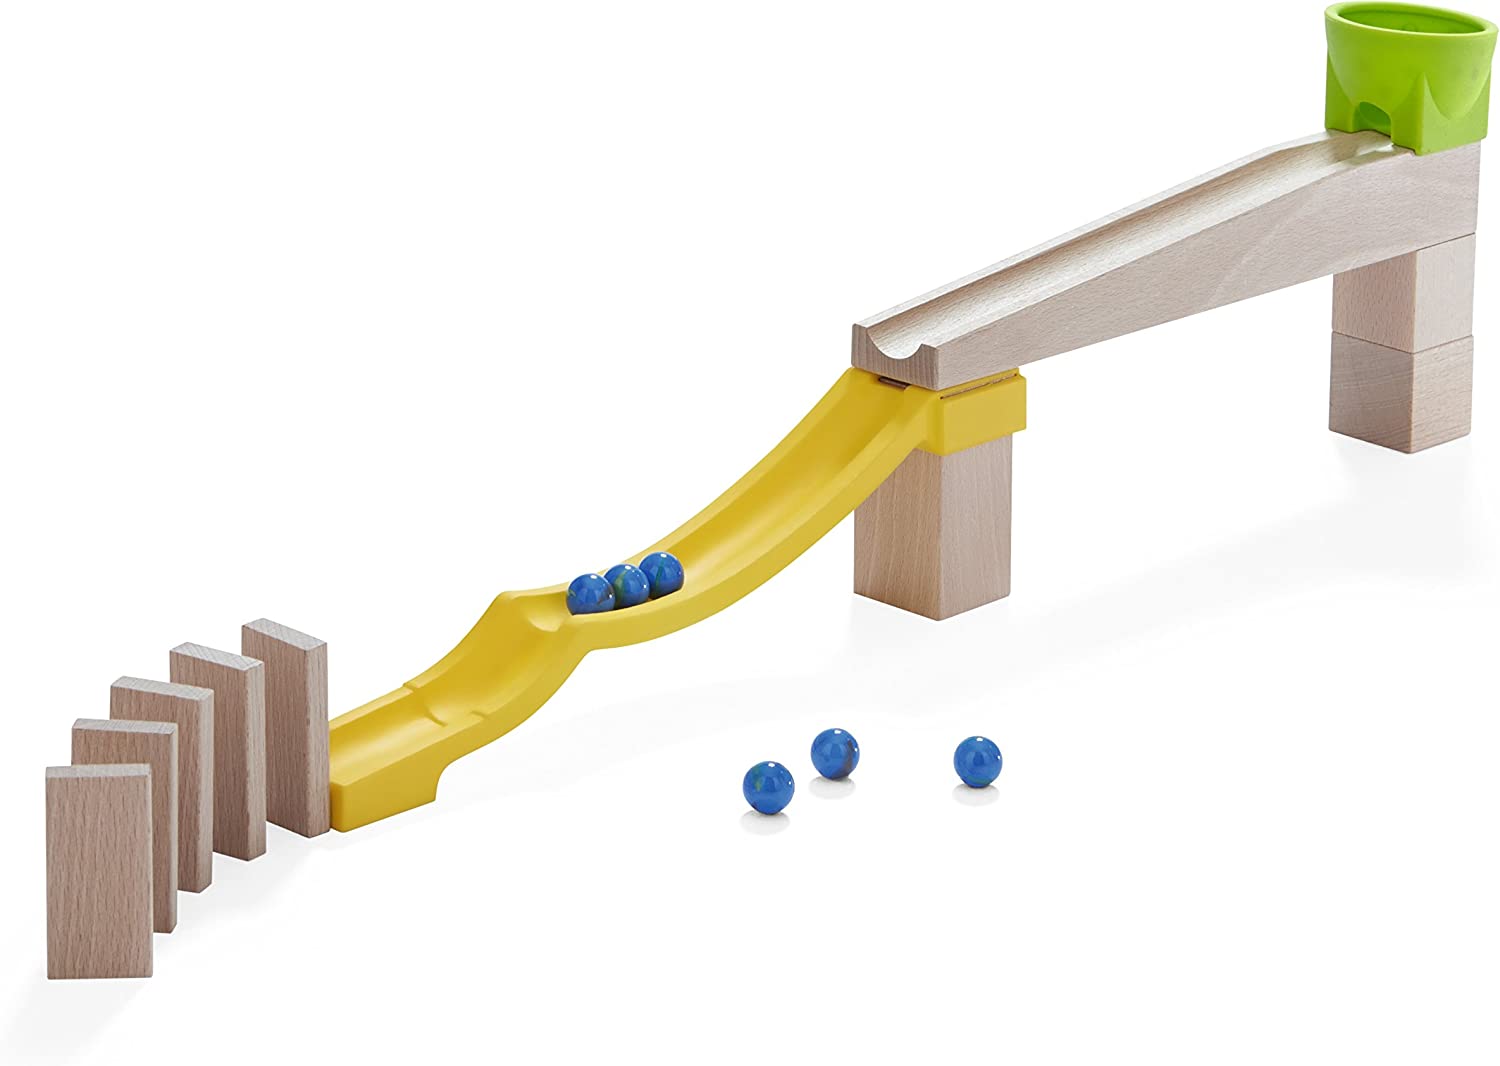 HABA Ball Track set - wooden playsets for children - HABA wooden toys at The Toy Room